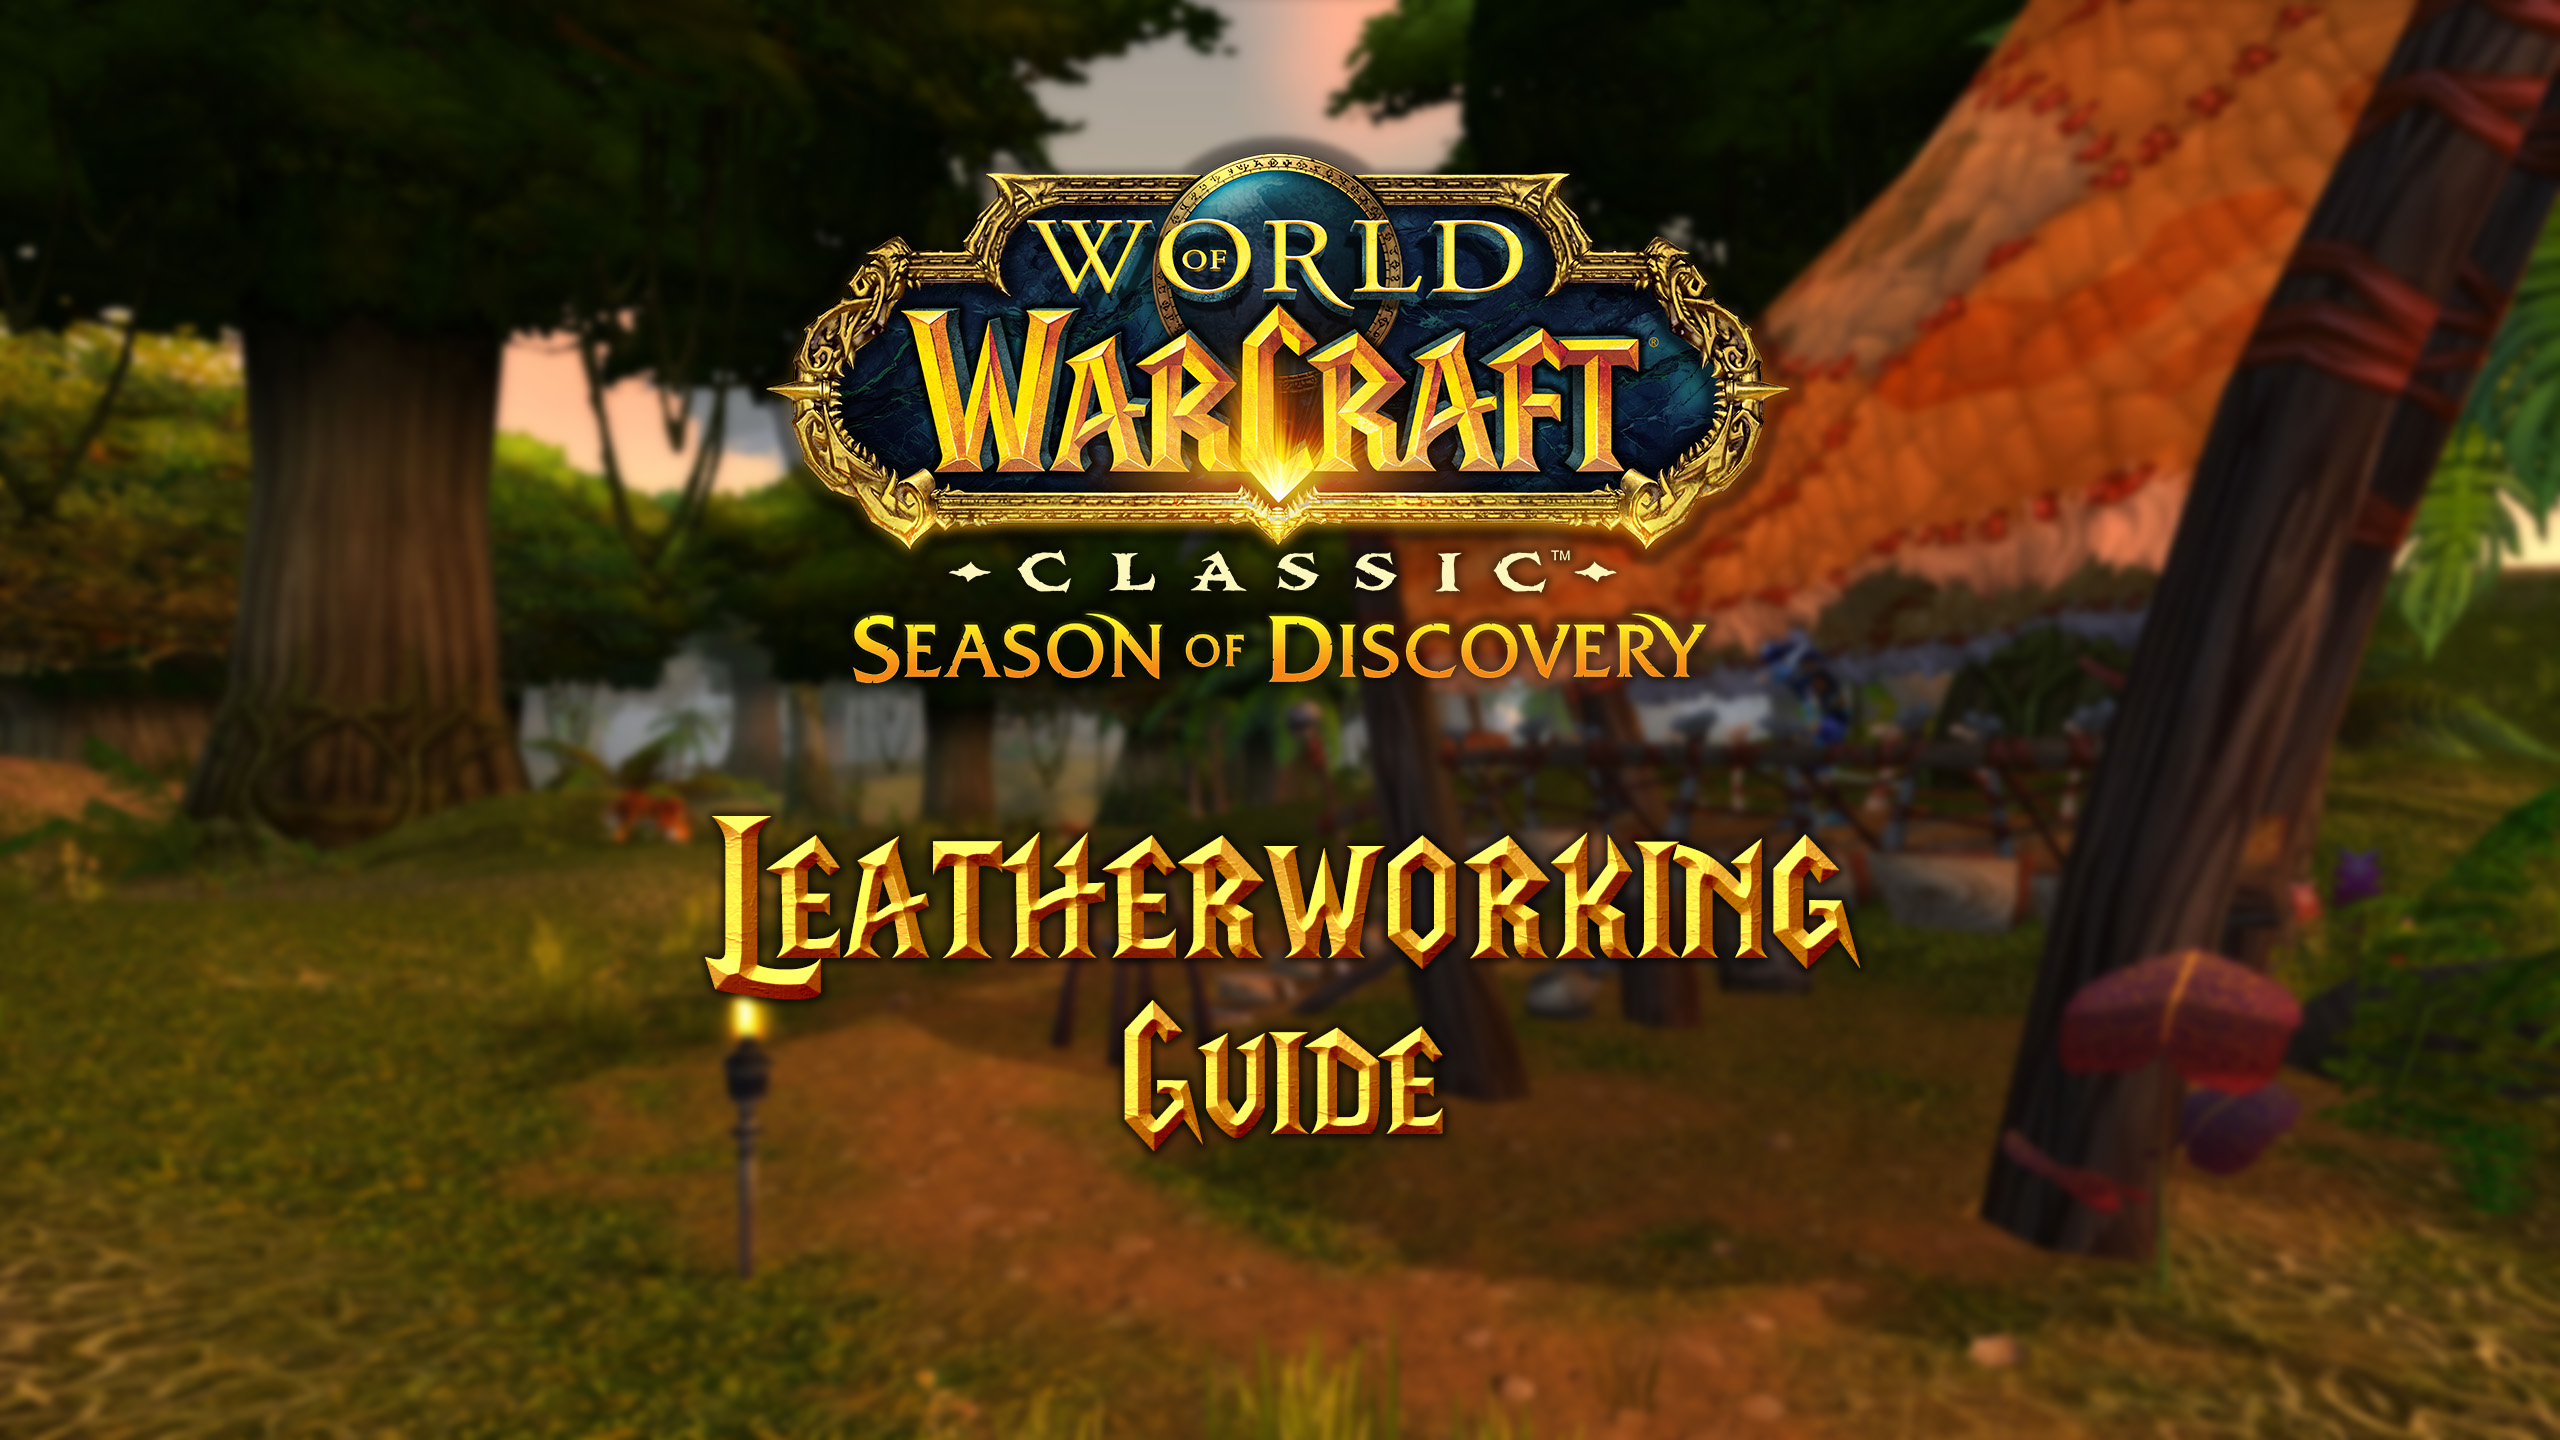 Leatherworking Guide for Season of Discovery (SoD)